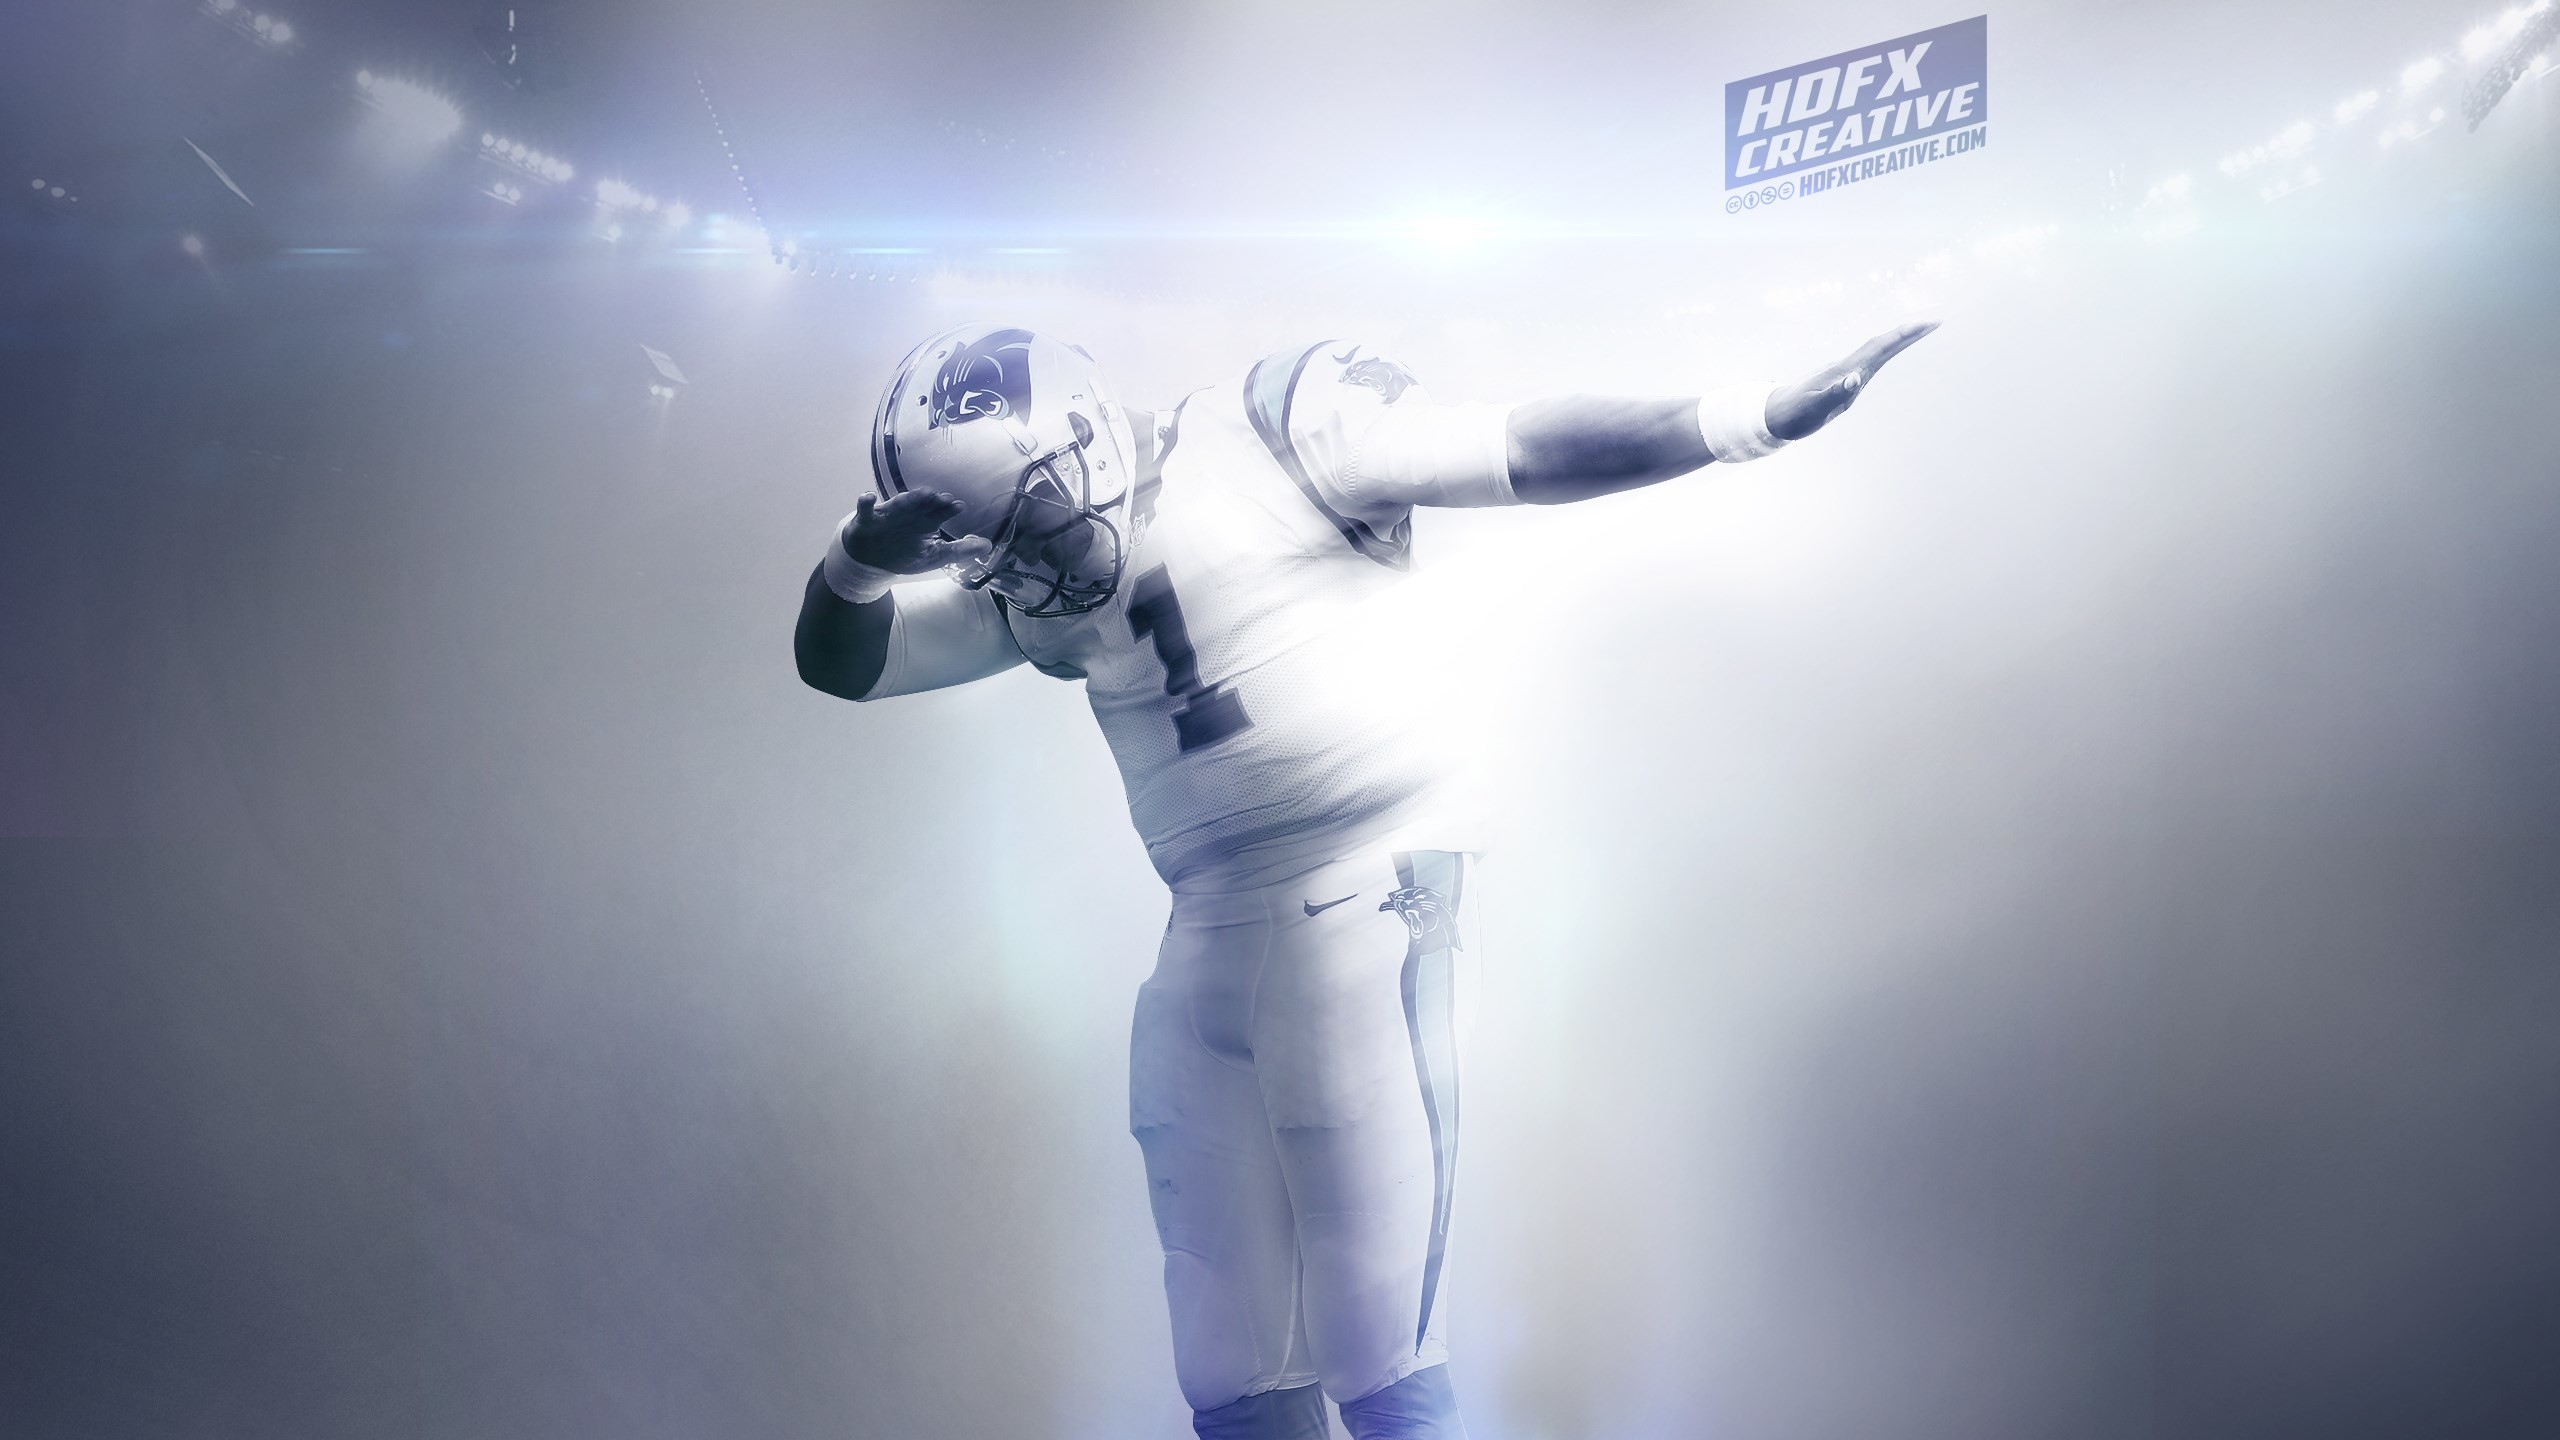 2560x1440 1966751, pictures of cam newton